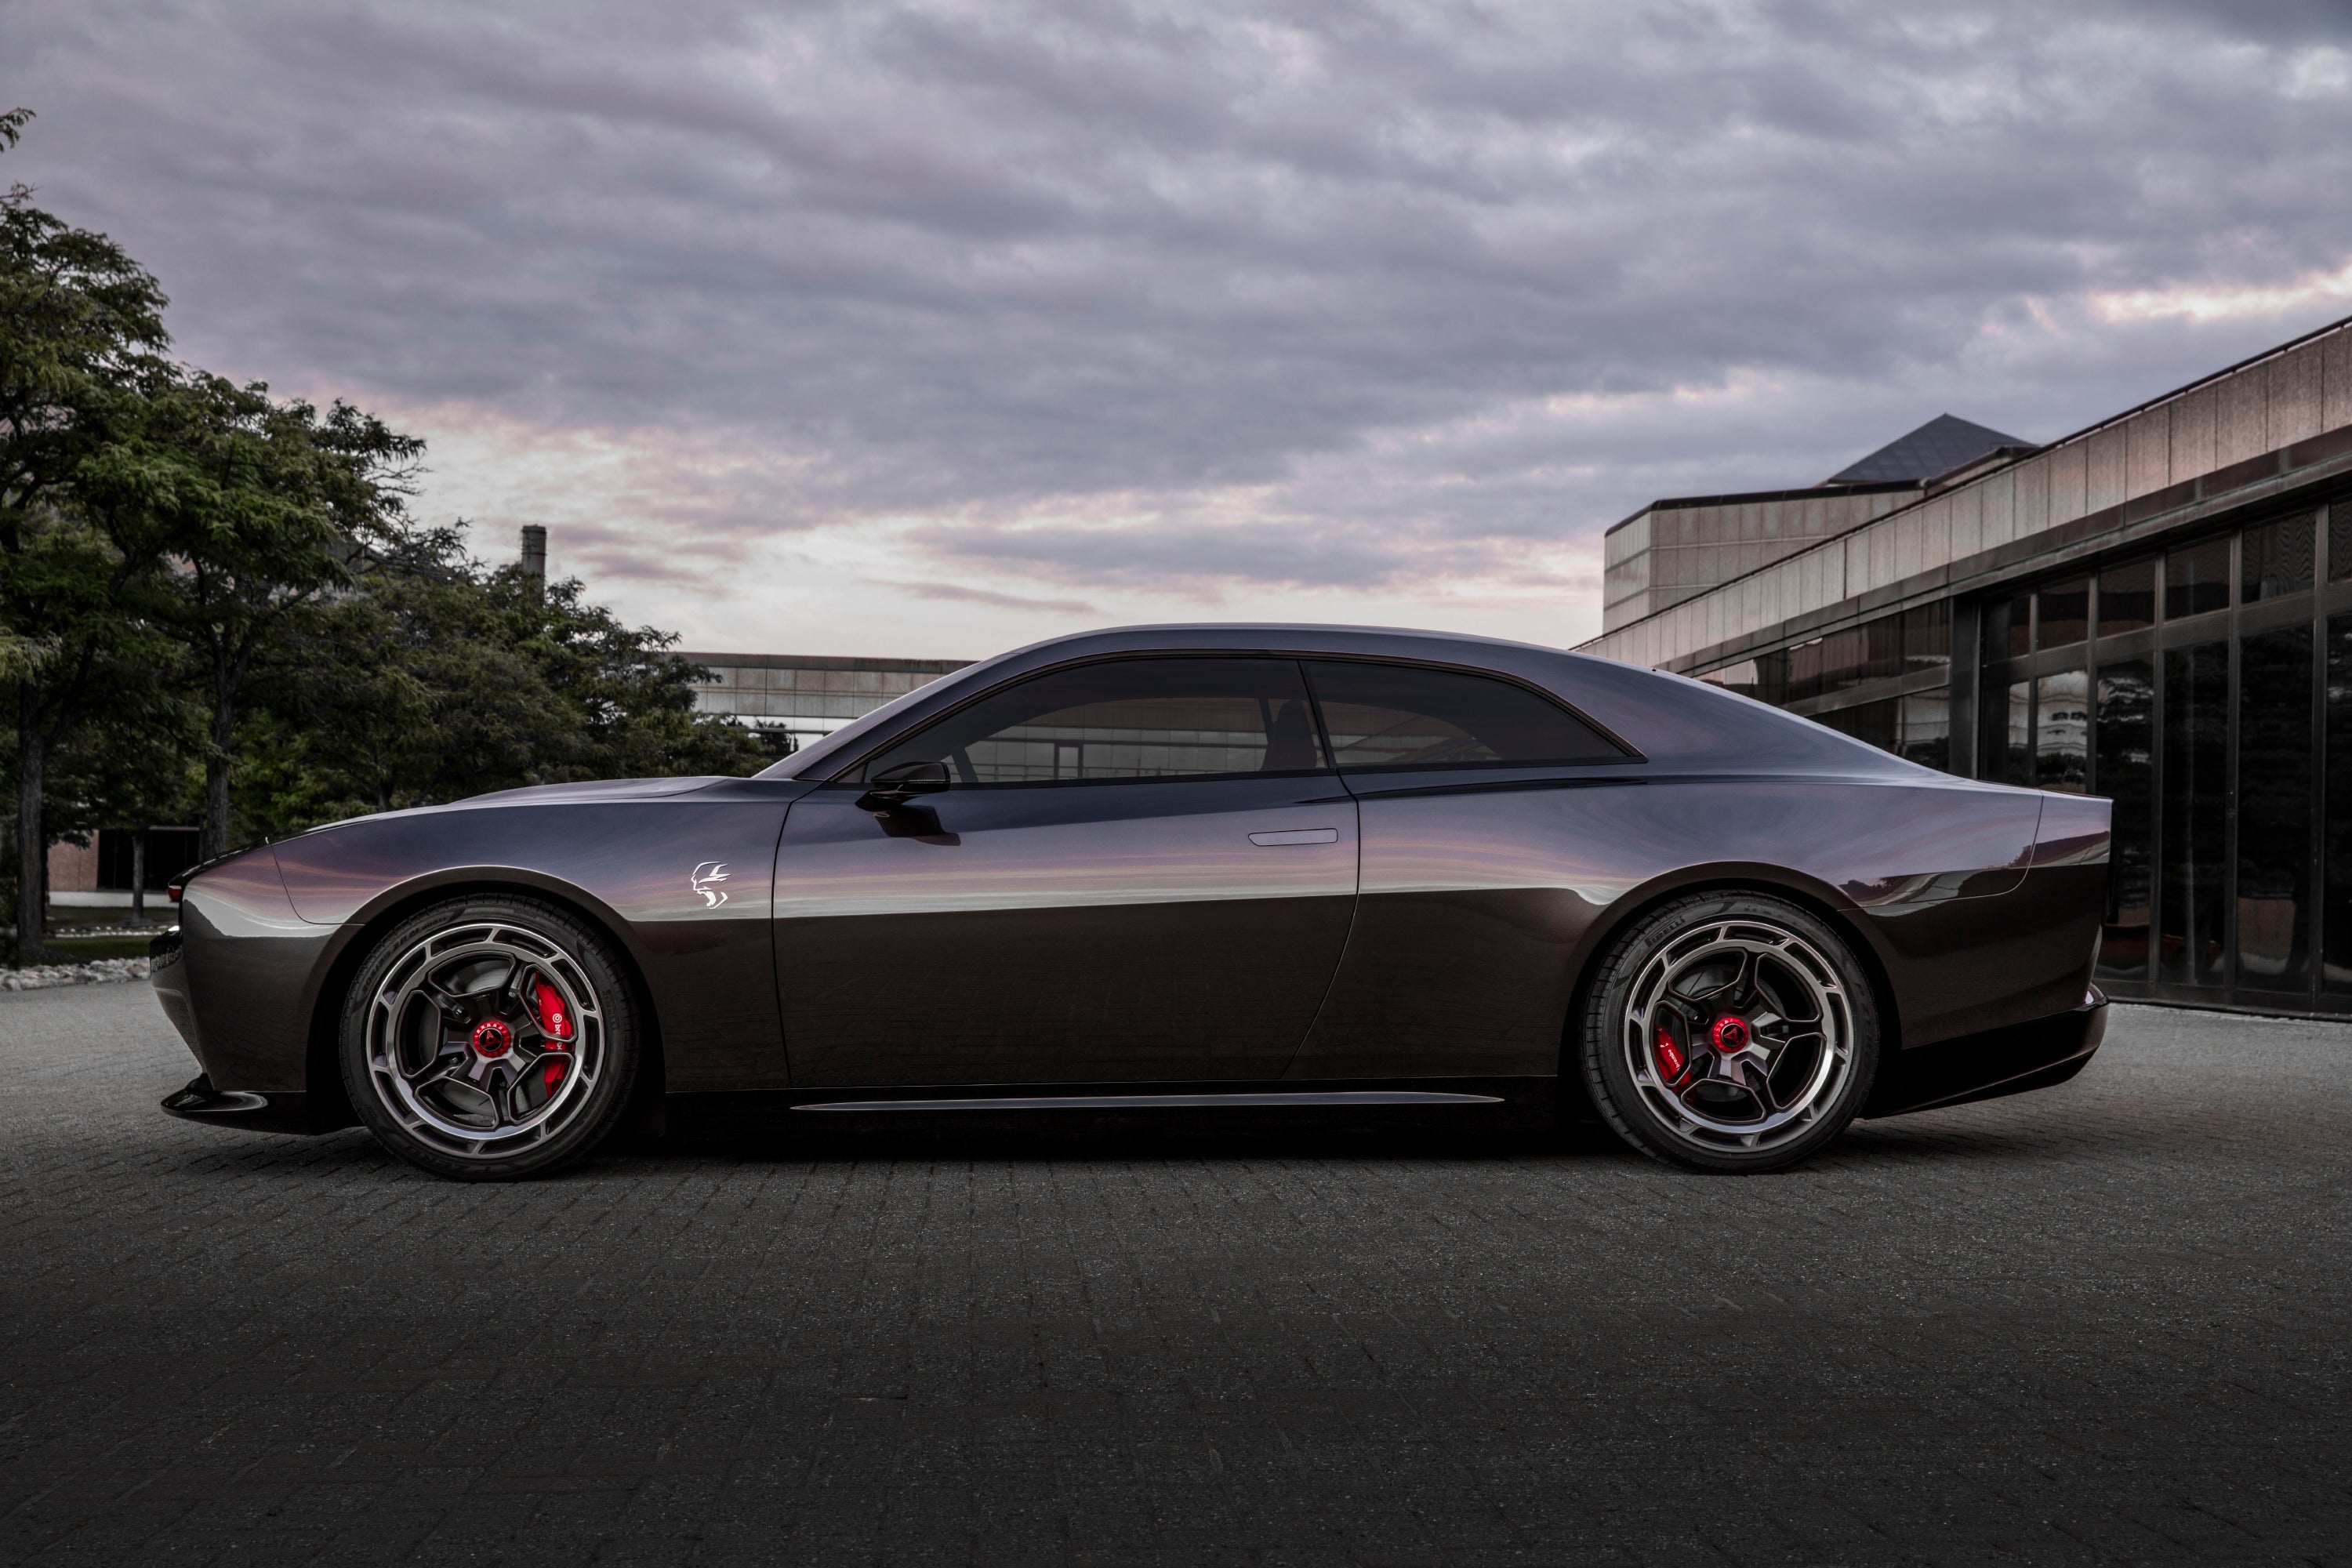 Dodge Ushers In The Electric Muscle Era With The Charger Daytona SRT Concept